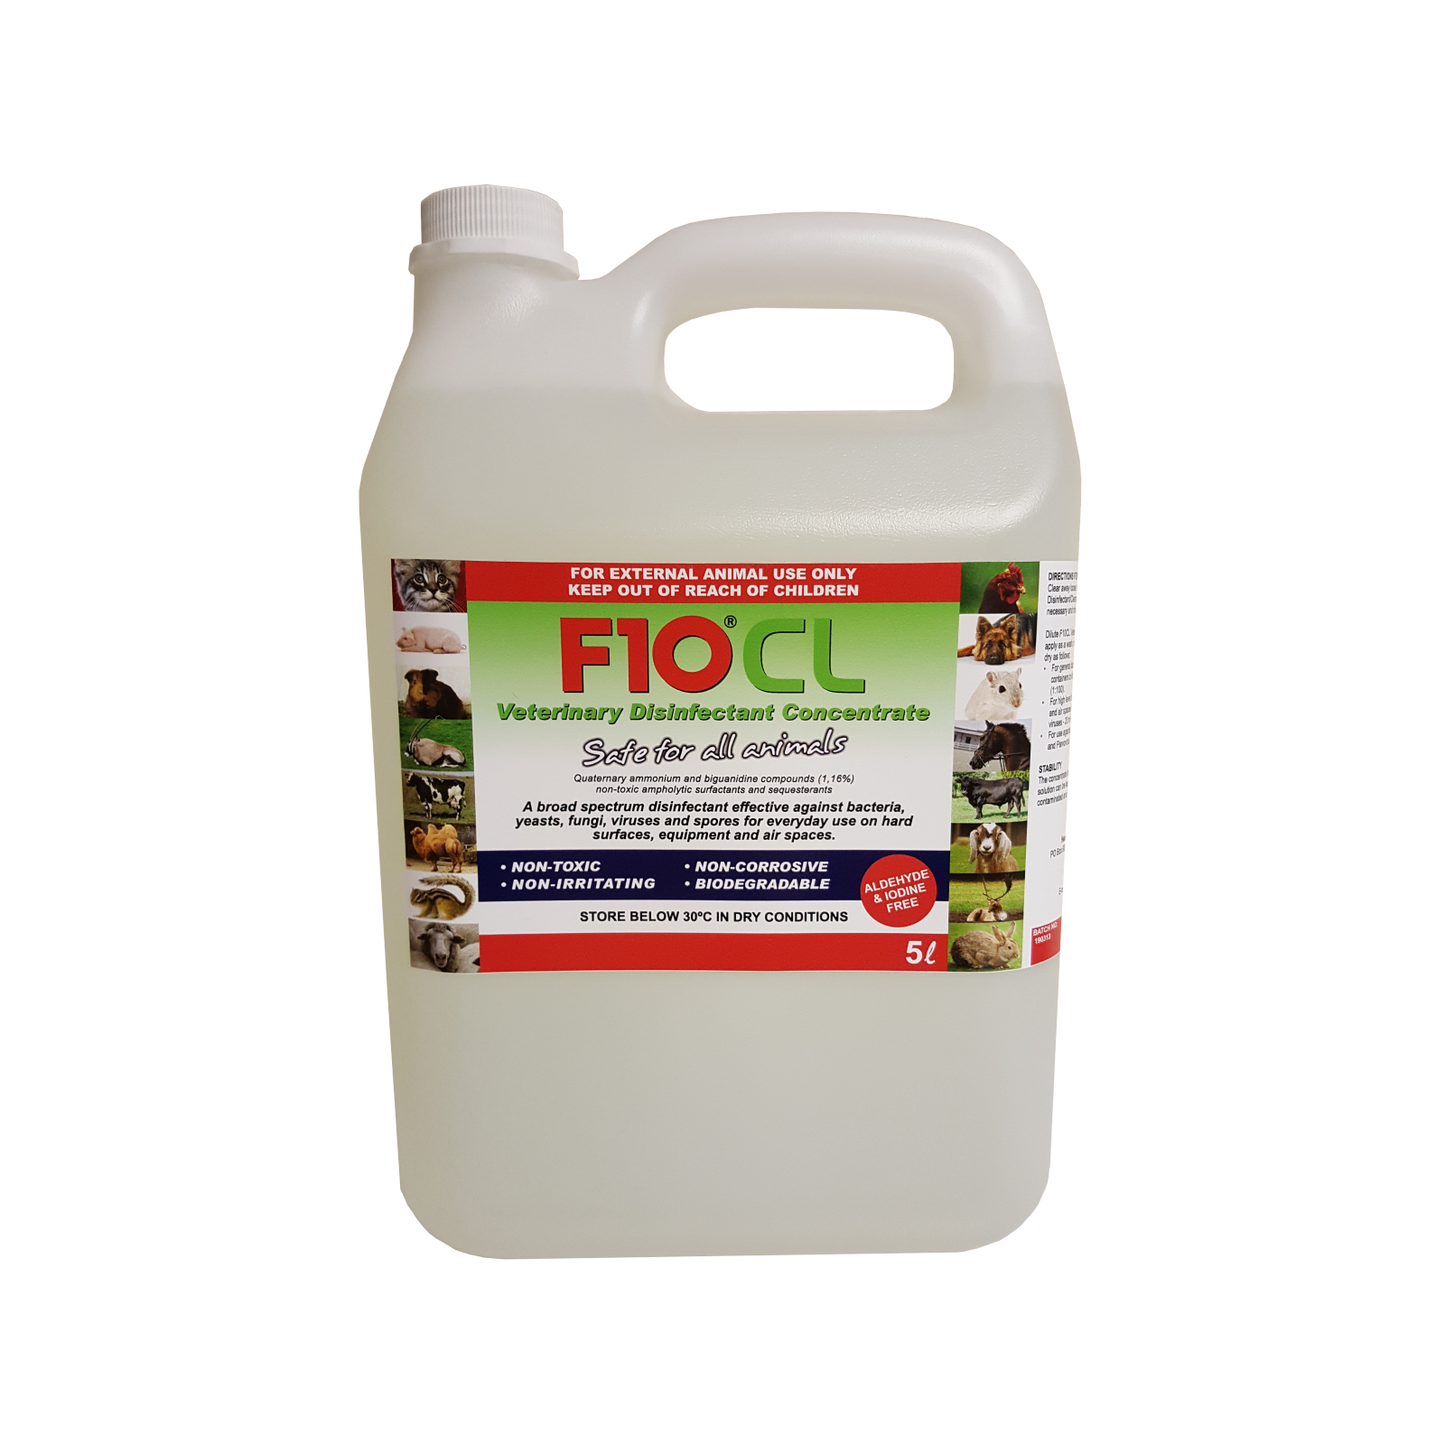 A 5 litre bottle of F10CL Veterinary Disinfectant Concentrate